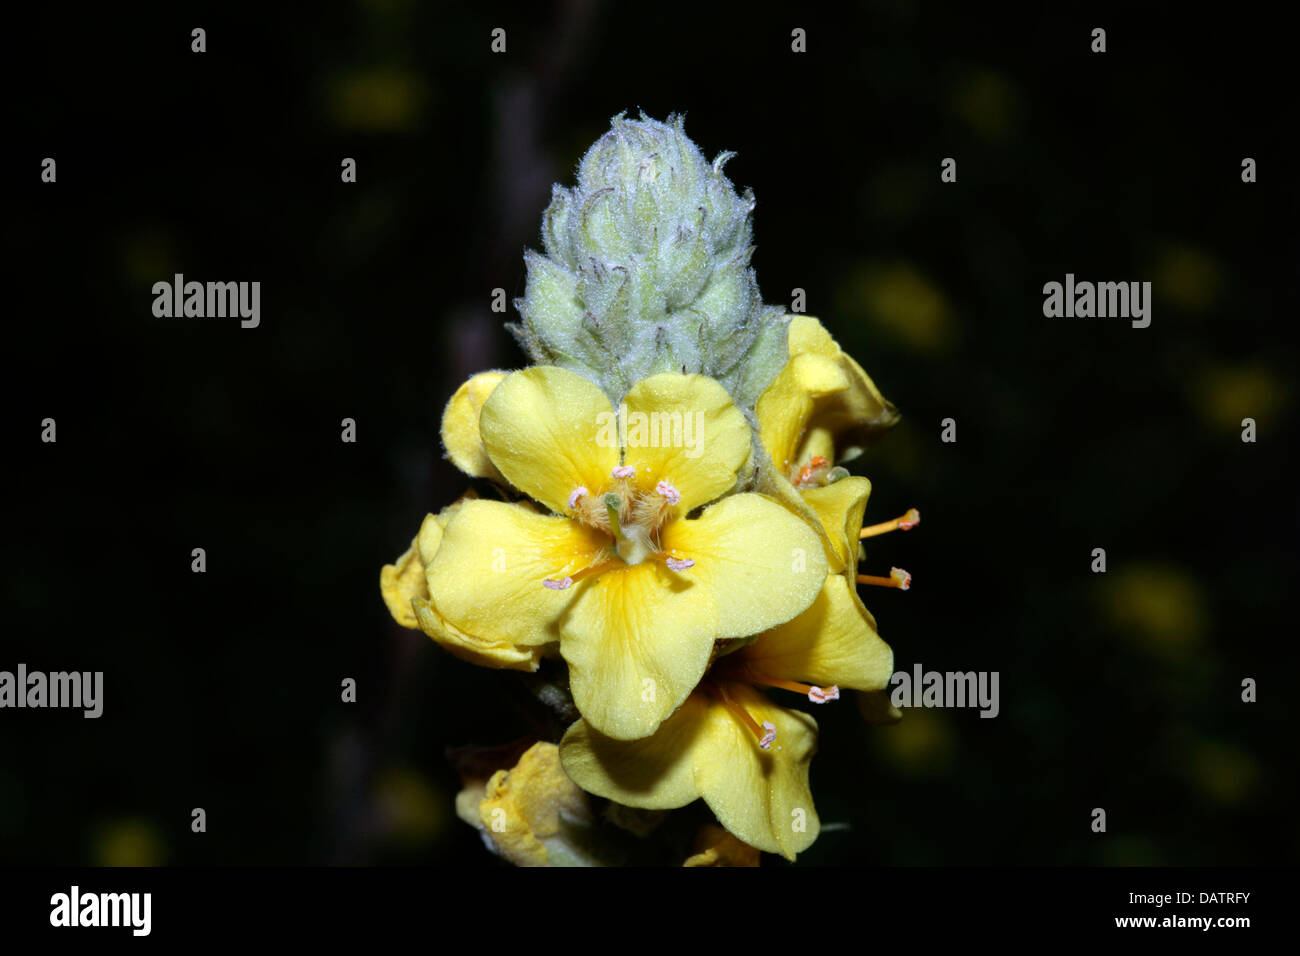 Great / Common Mullein- Verbascum thapsus- Family Scrophulariaceae Stock Photo